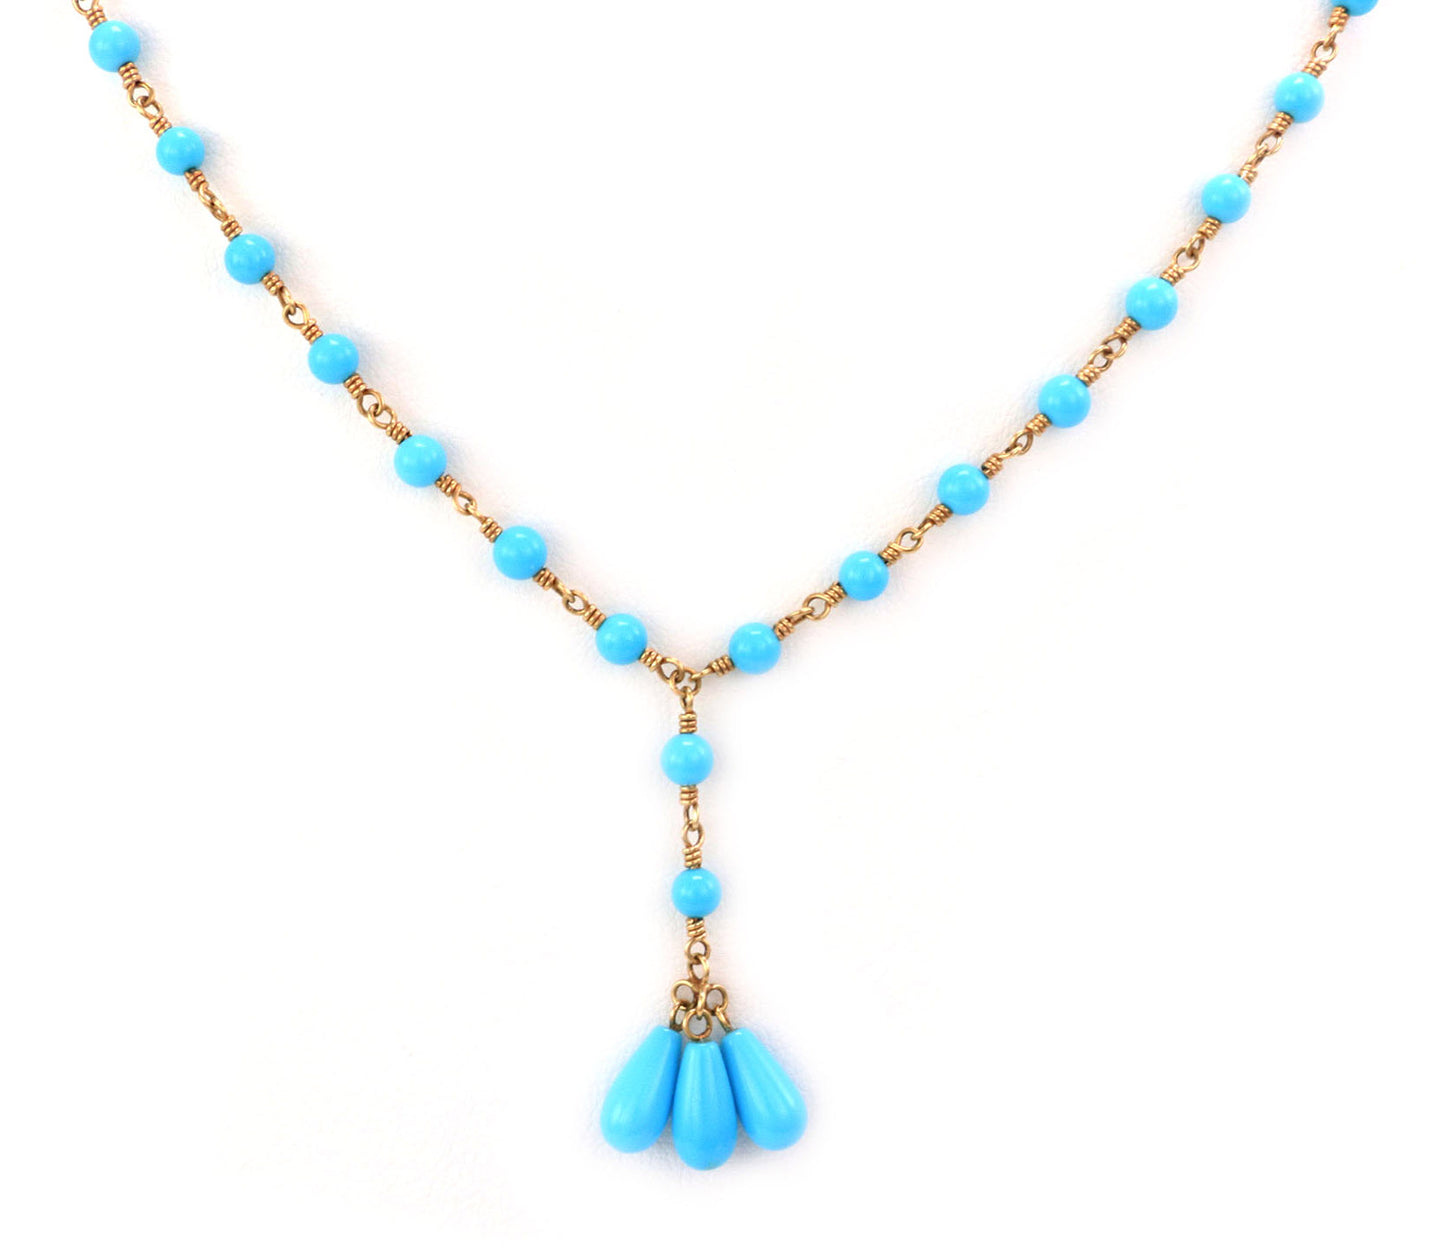 Tiffany & Co. Turquoise 18k Yellow Gold Teardrop Beaded Necklace